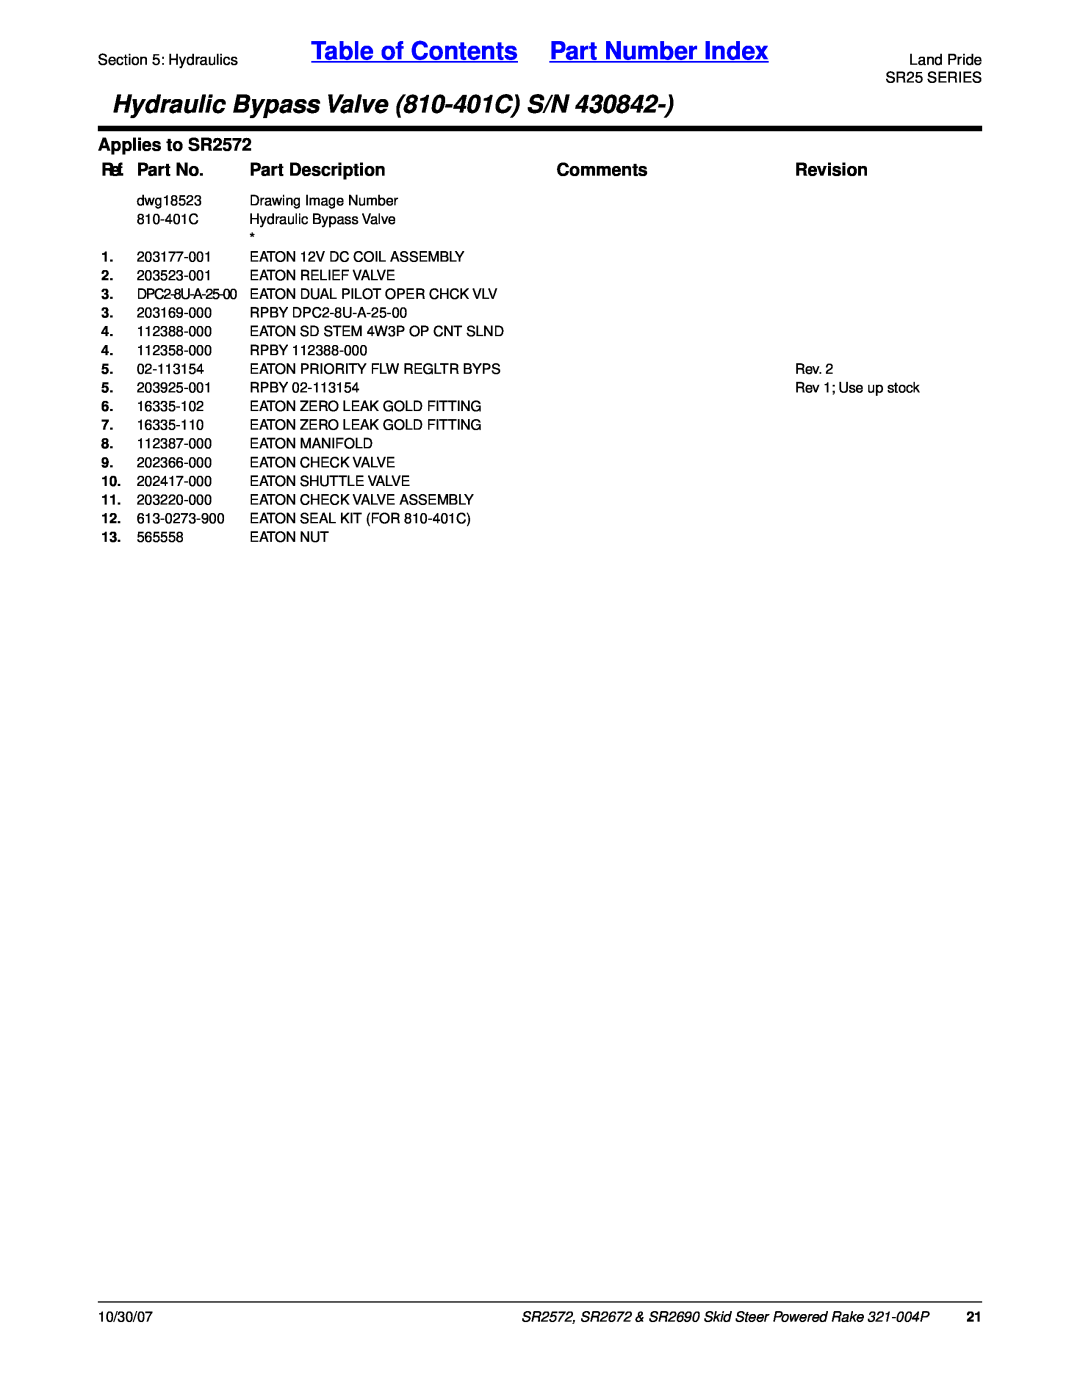 Land Pride SR2690 Table of Contents Part Number Index, Hydraulic Bypass Valve 810-401CS/N, Applies to SR2572, Ref. Part No 